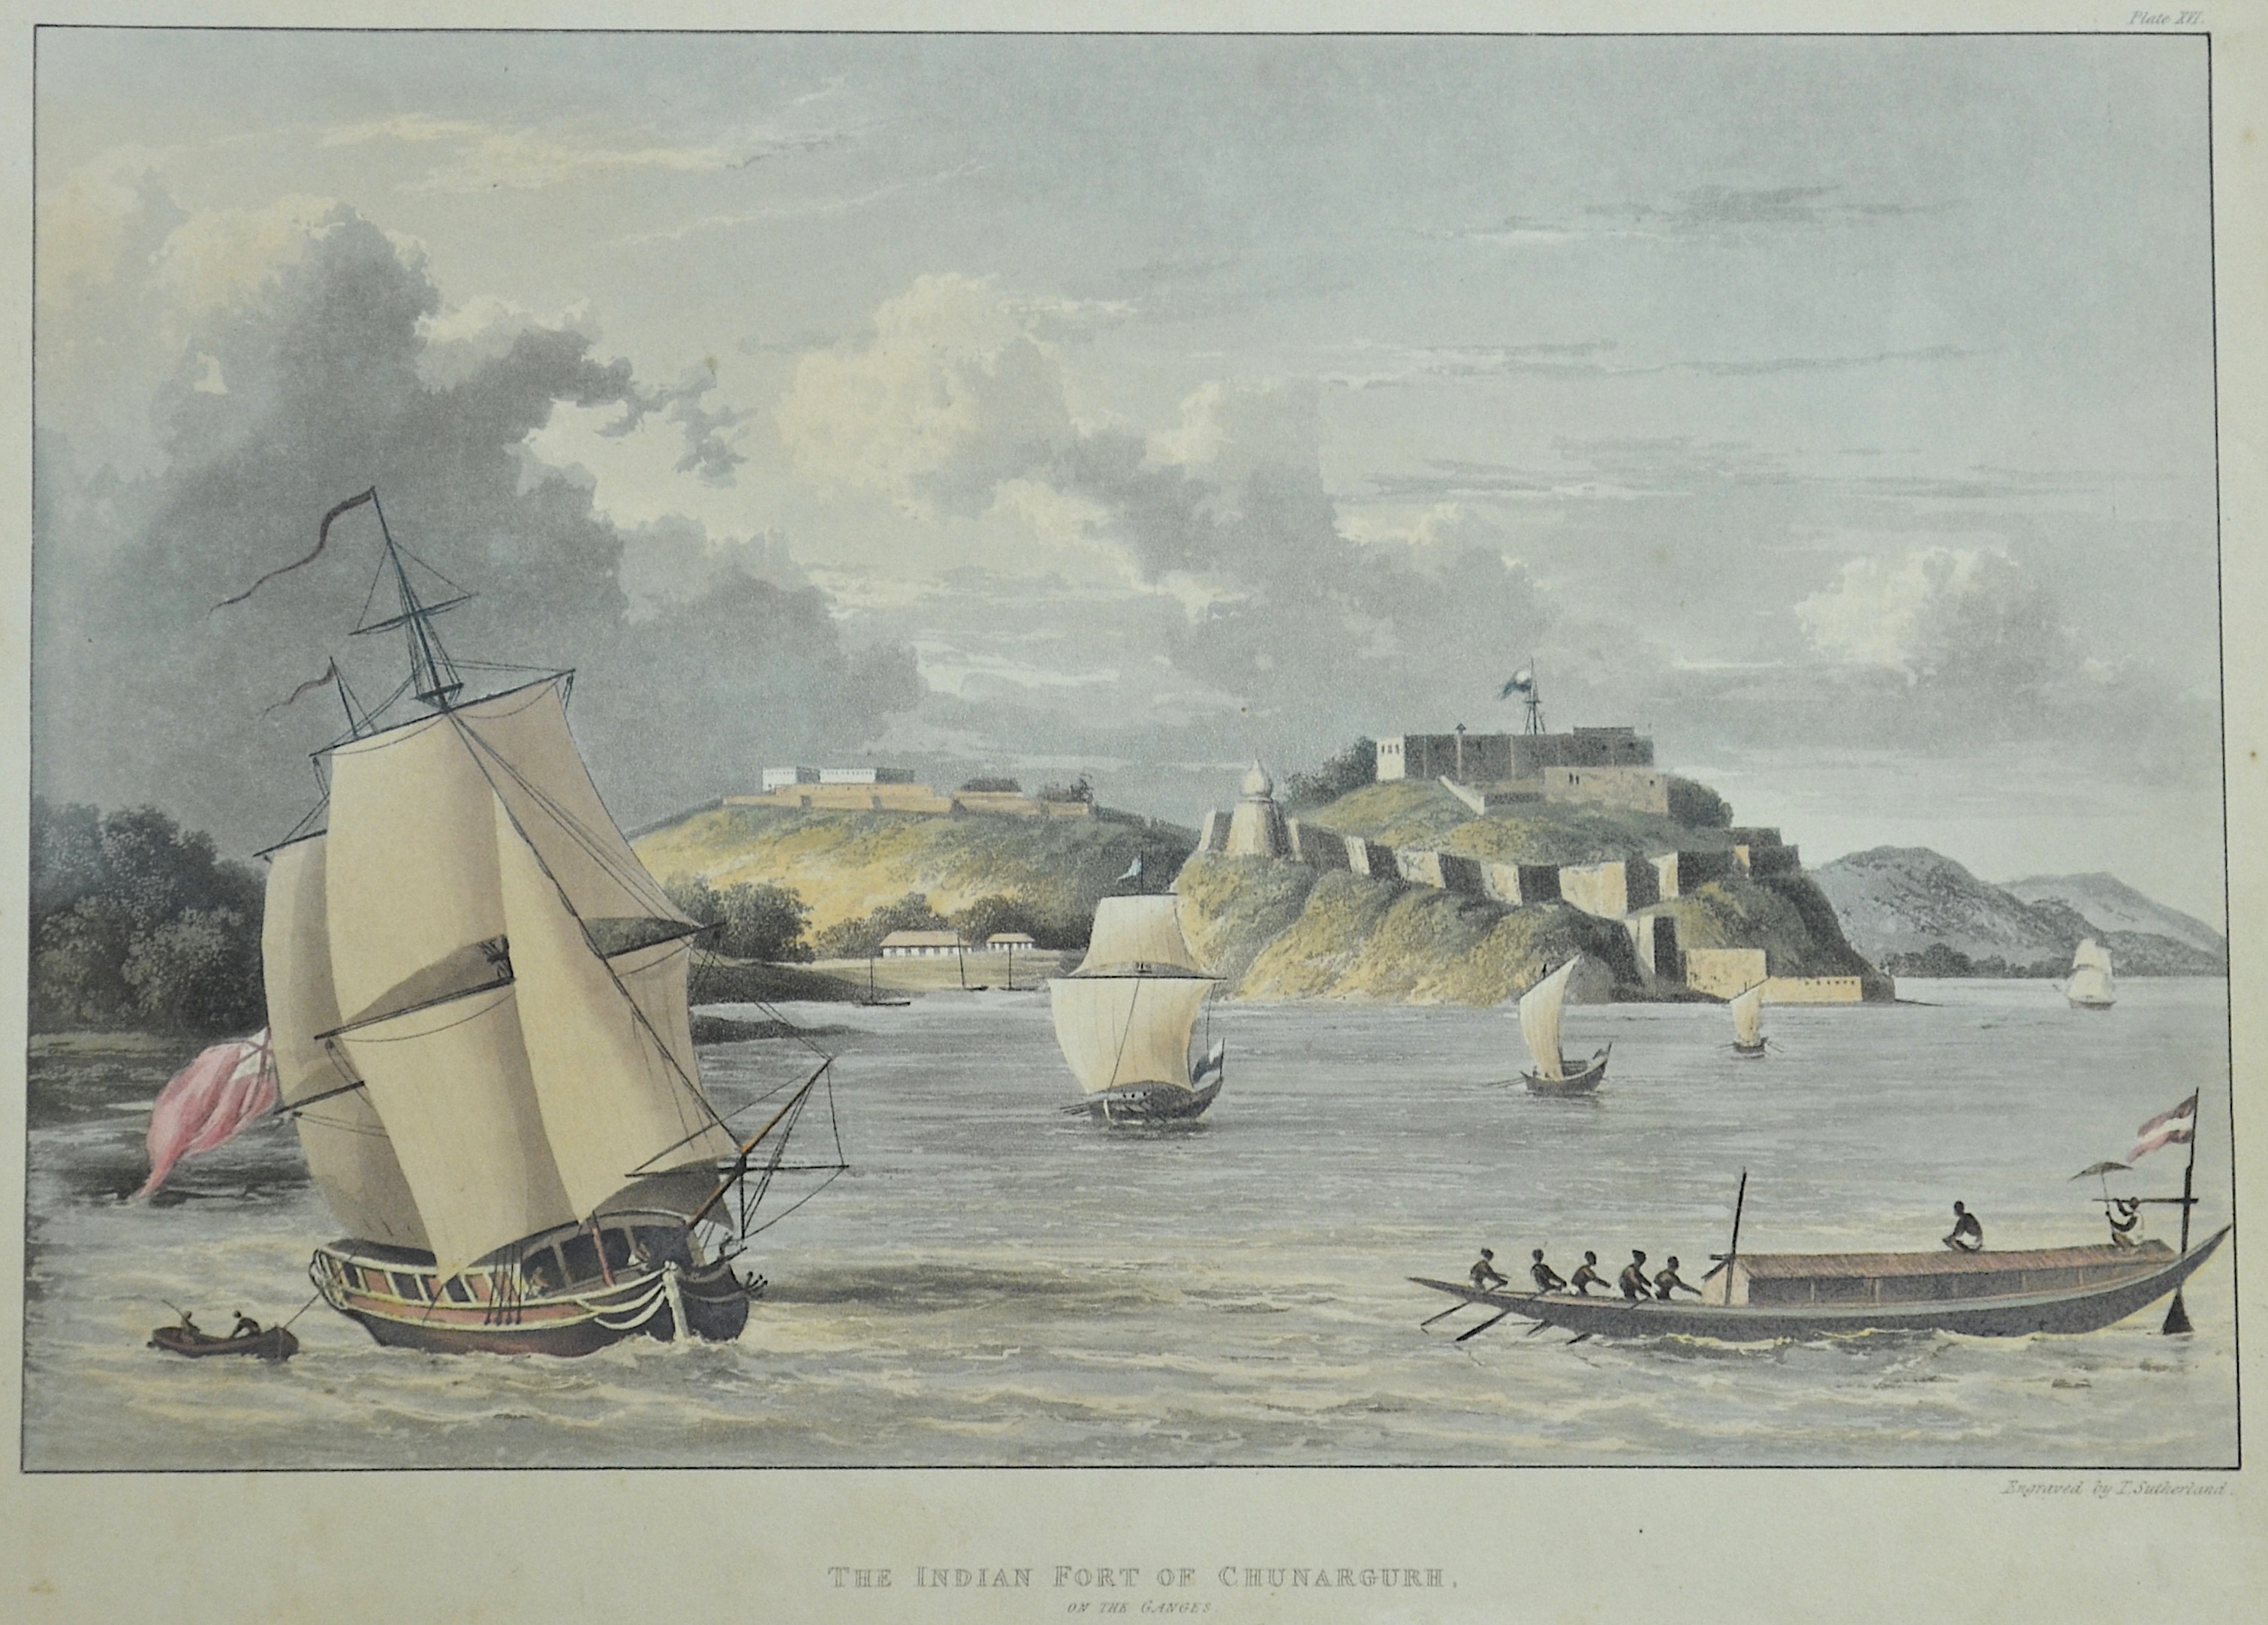 Sutherland T. The Indian Fort of Chunargurh on the Ganges